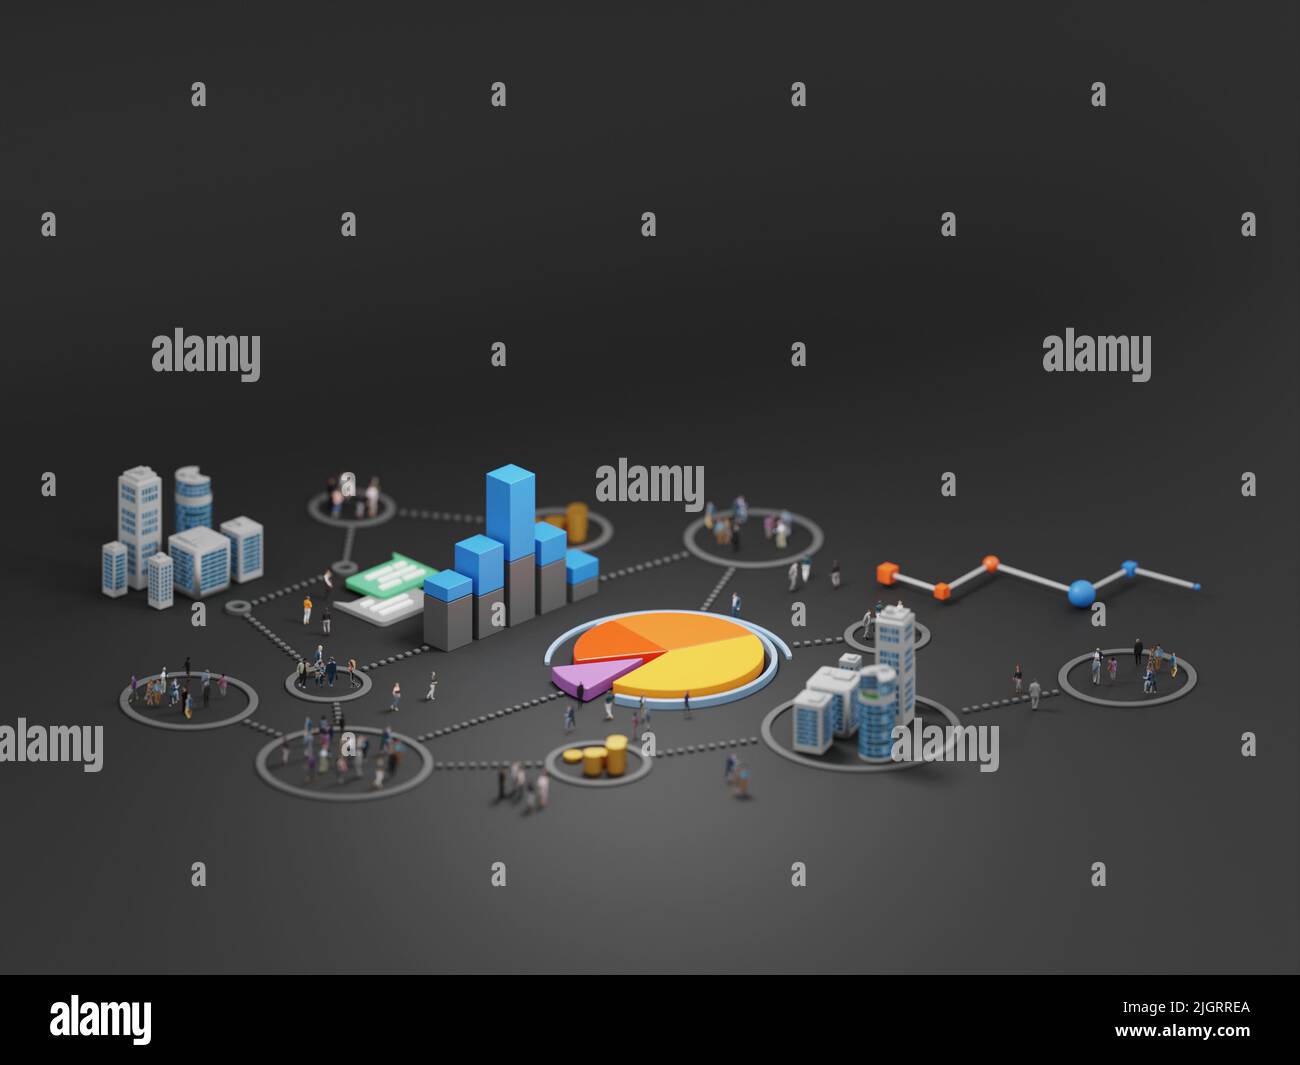 Big data analytics, abstract concept. Graphs and charts showing information and groups of people on a black background. Digital 3D rendering. Stock Photo